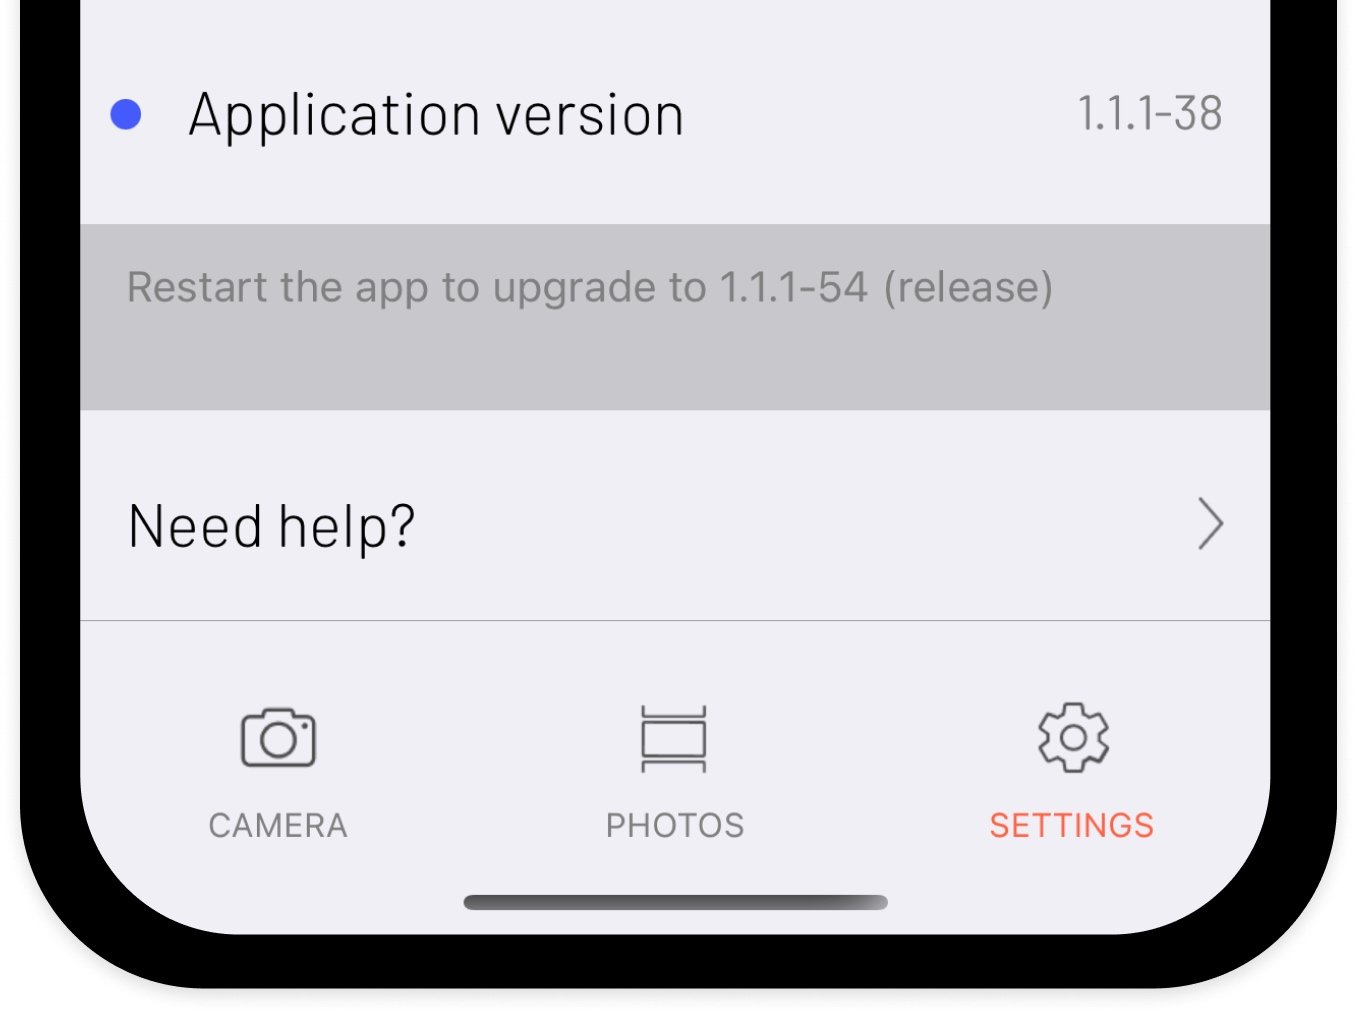 New Pixii application release available after an application restart